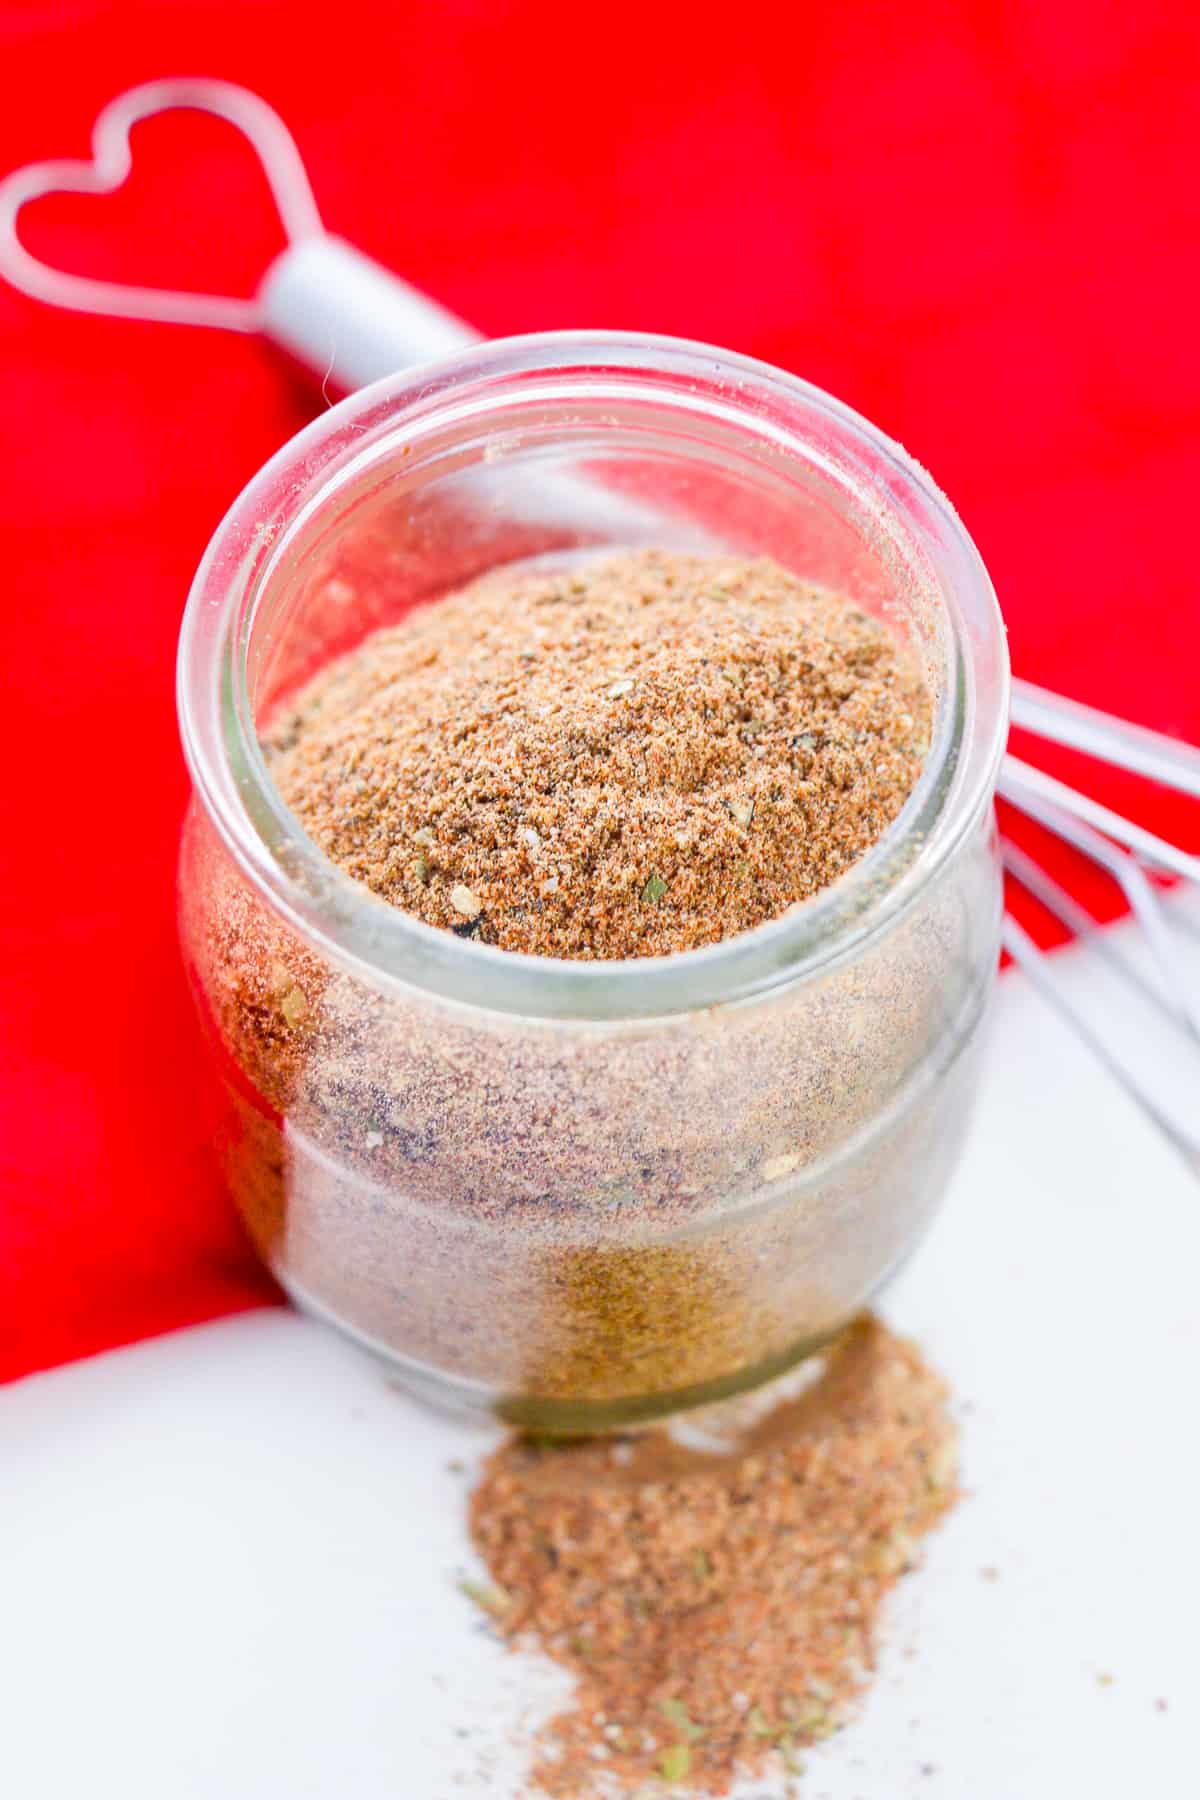 Homemade Chili Seasoning Mix in small glass jar with wire whisk next to it